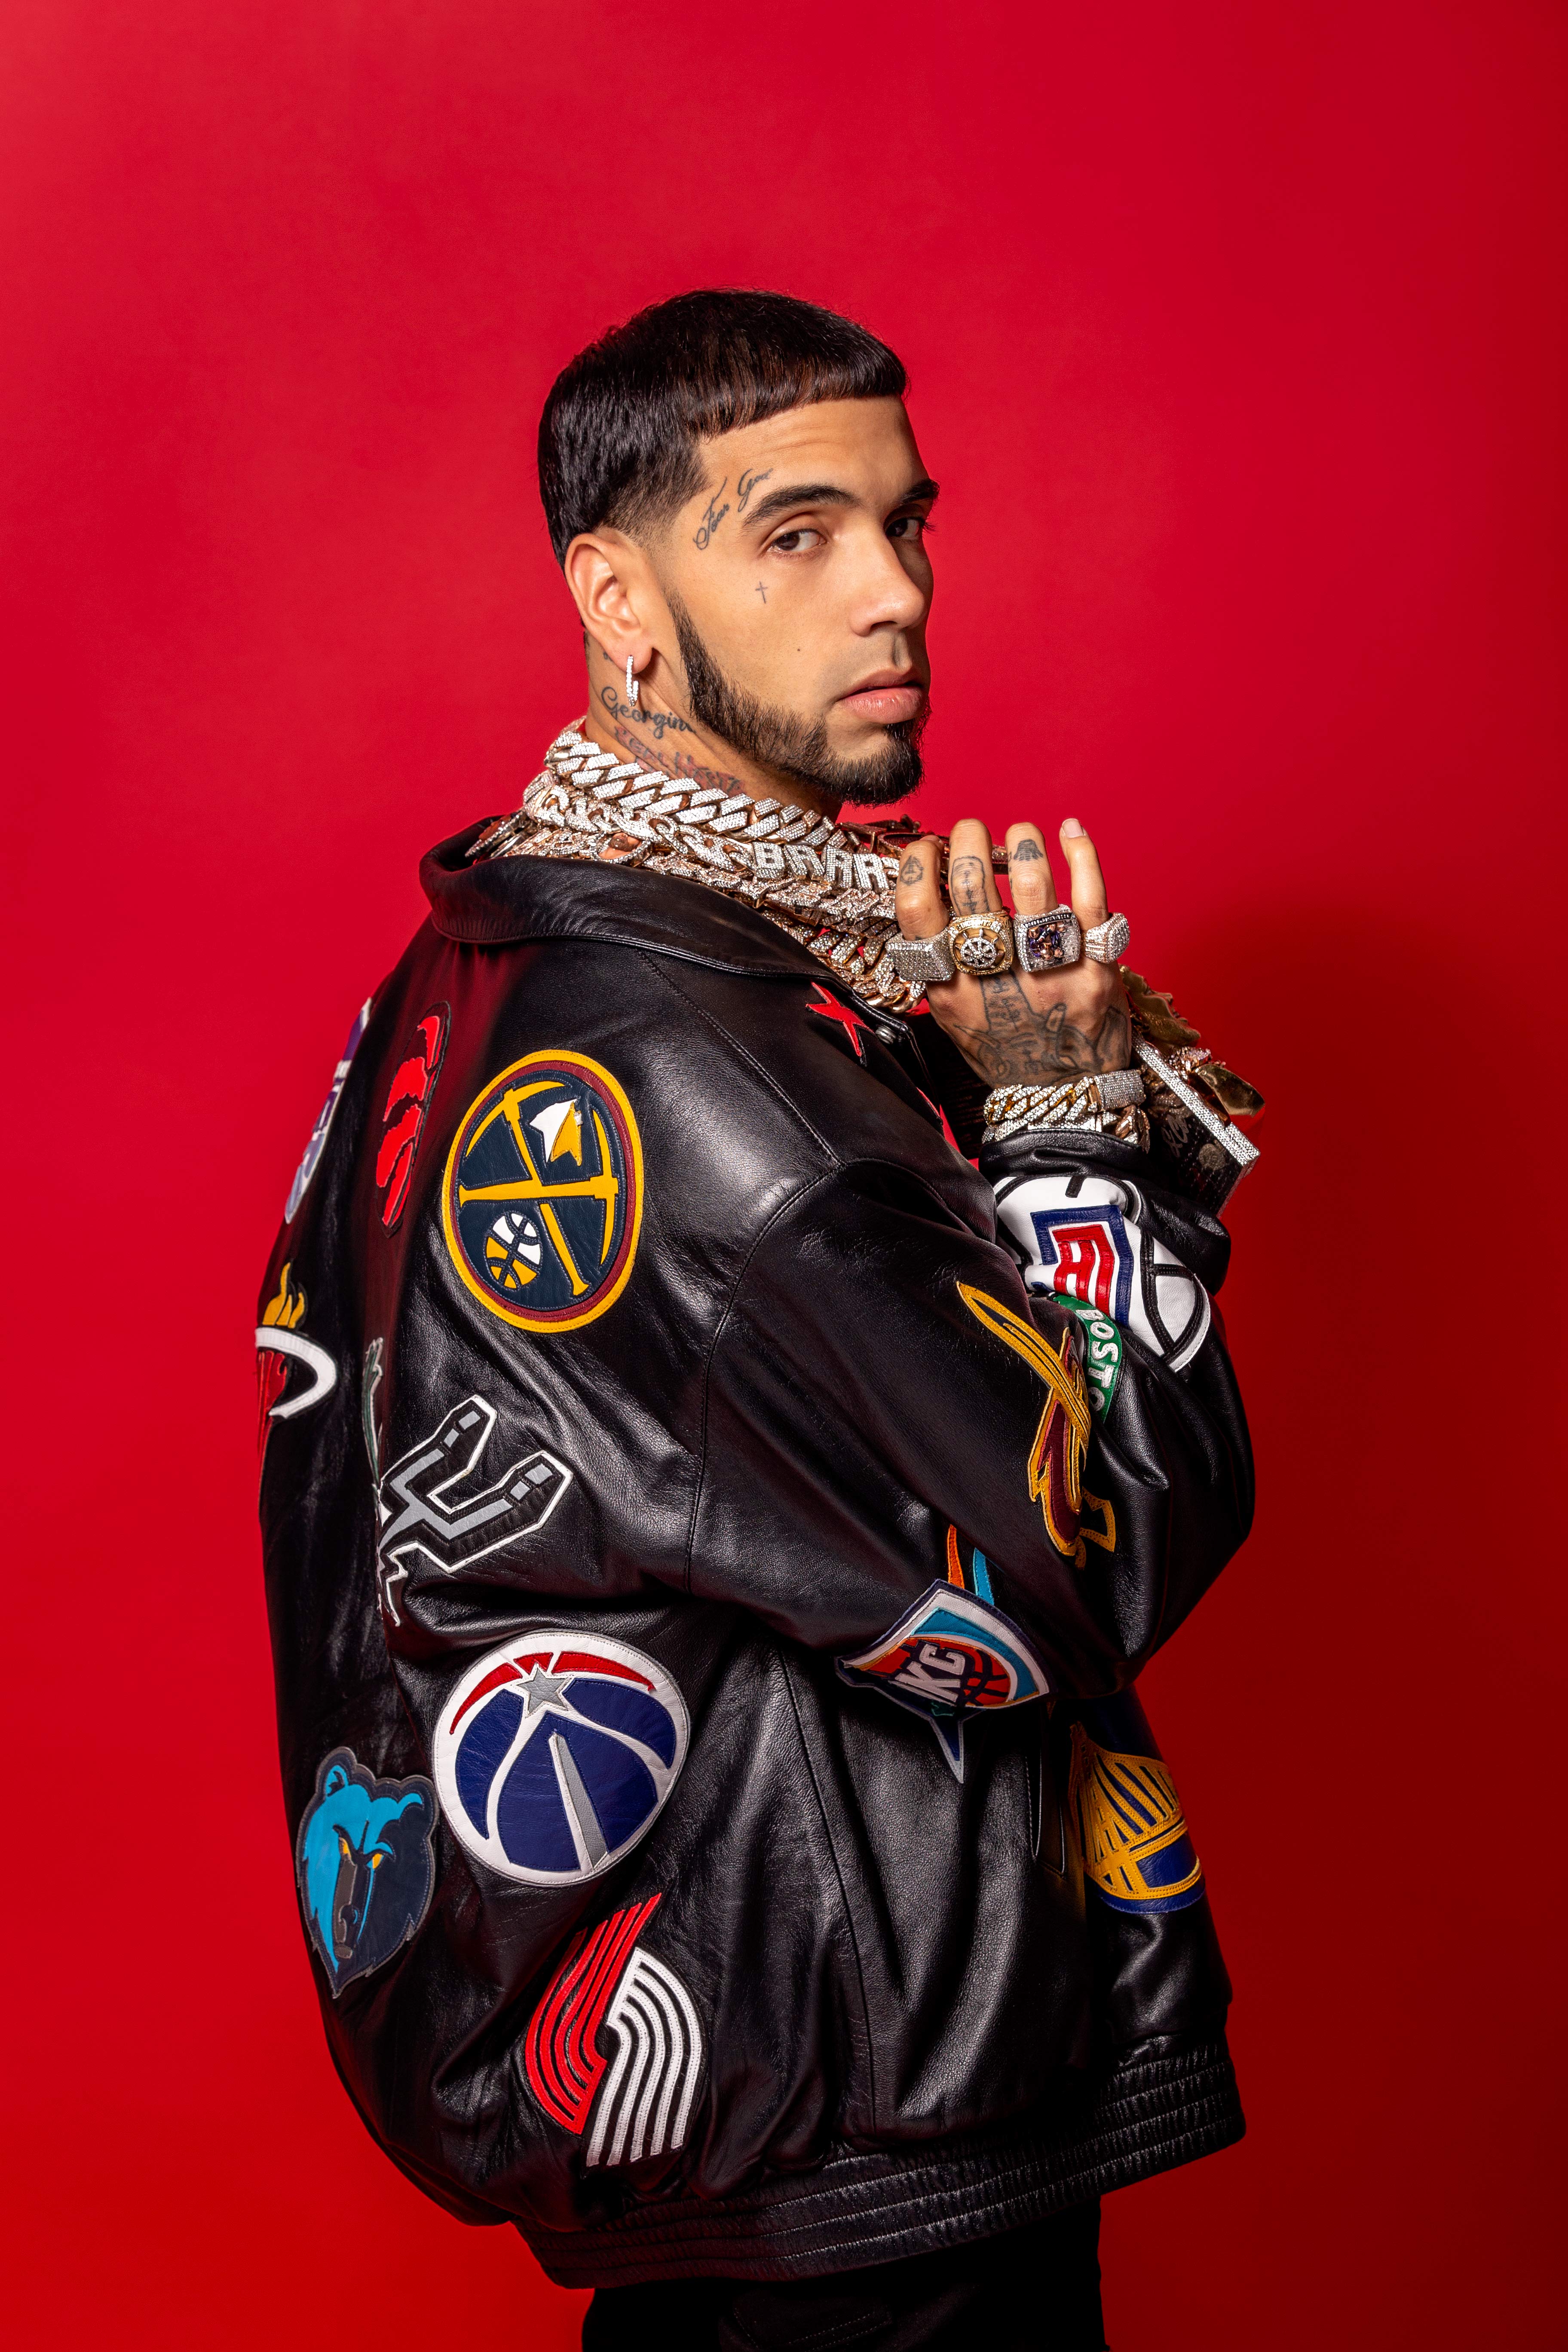 ANUEL AA: LEGENDS NEVER DIE WORLD TOUR in Dallas promo photo for Ticketmaster presale offer code